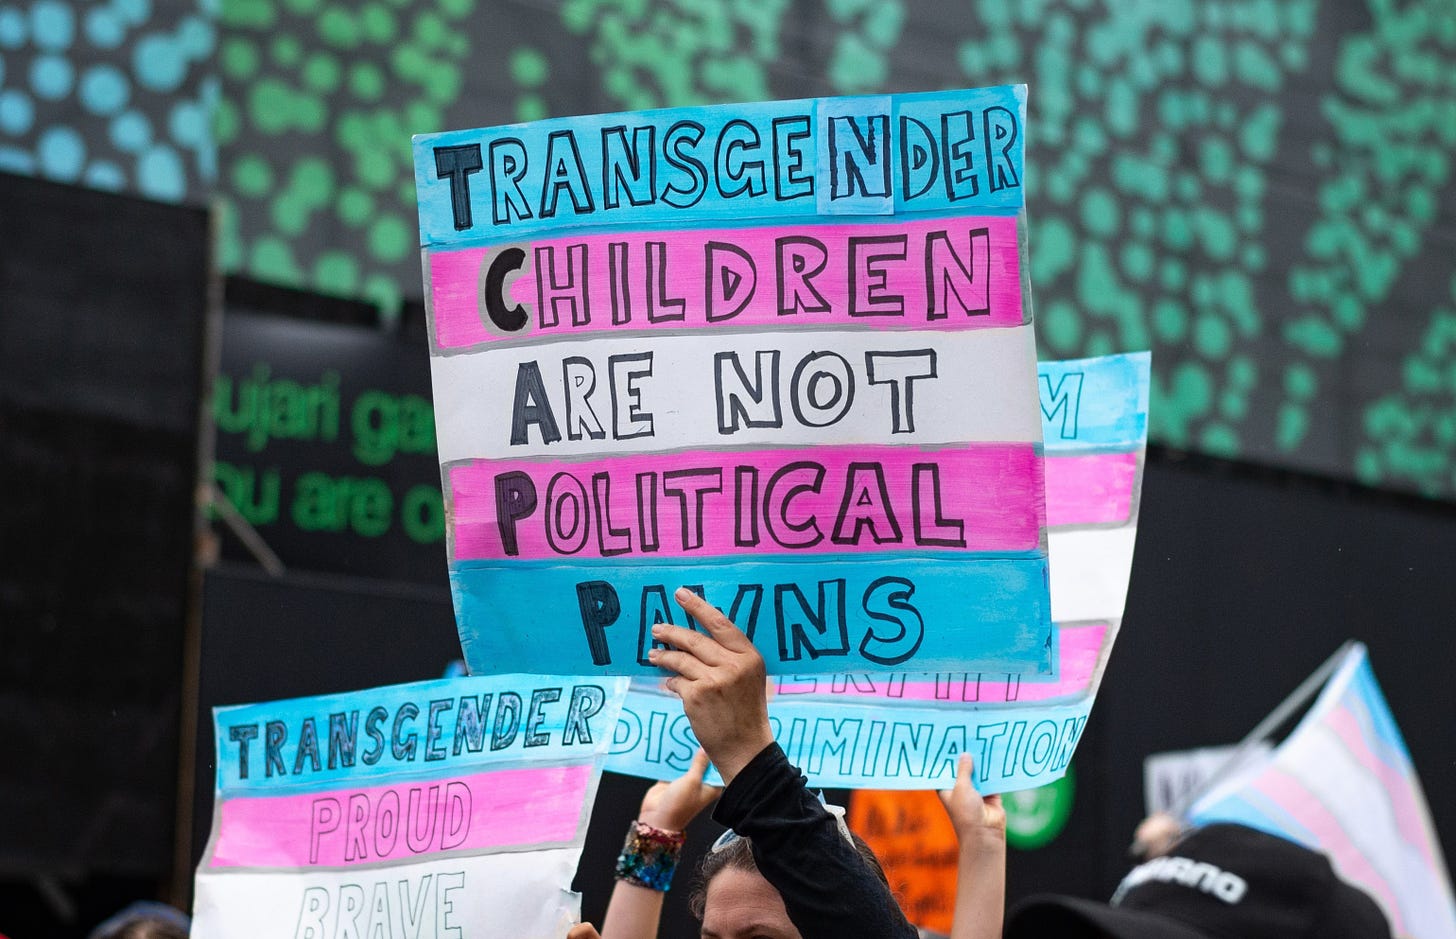 Pink white and blue sign reads "Transgender children are not political pawns" in trans rally